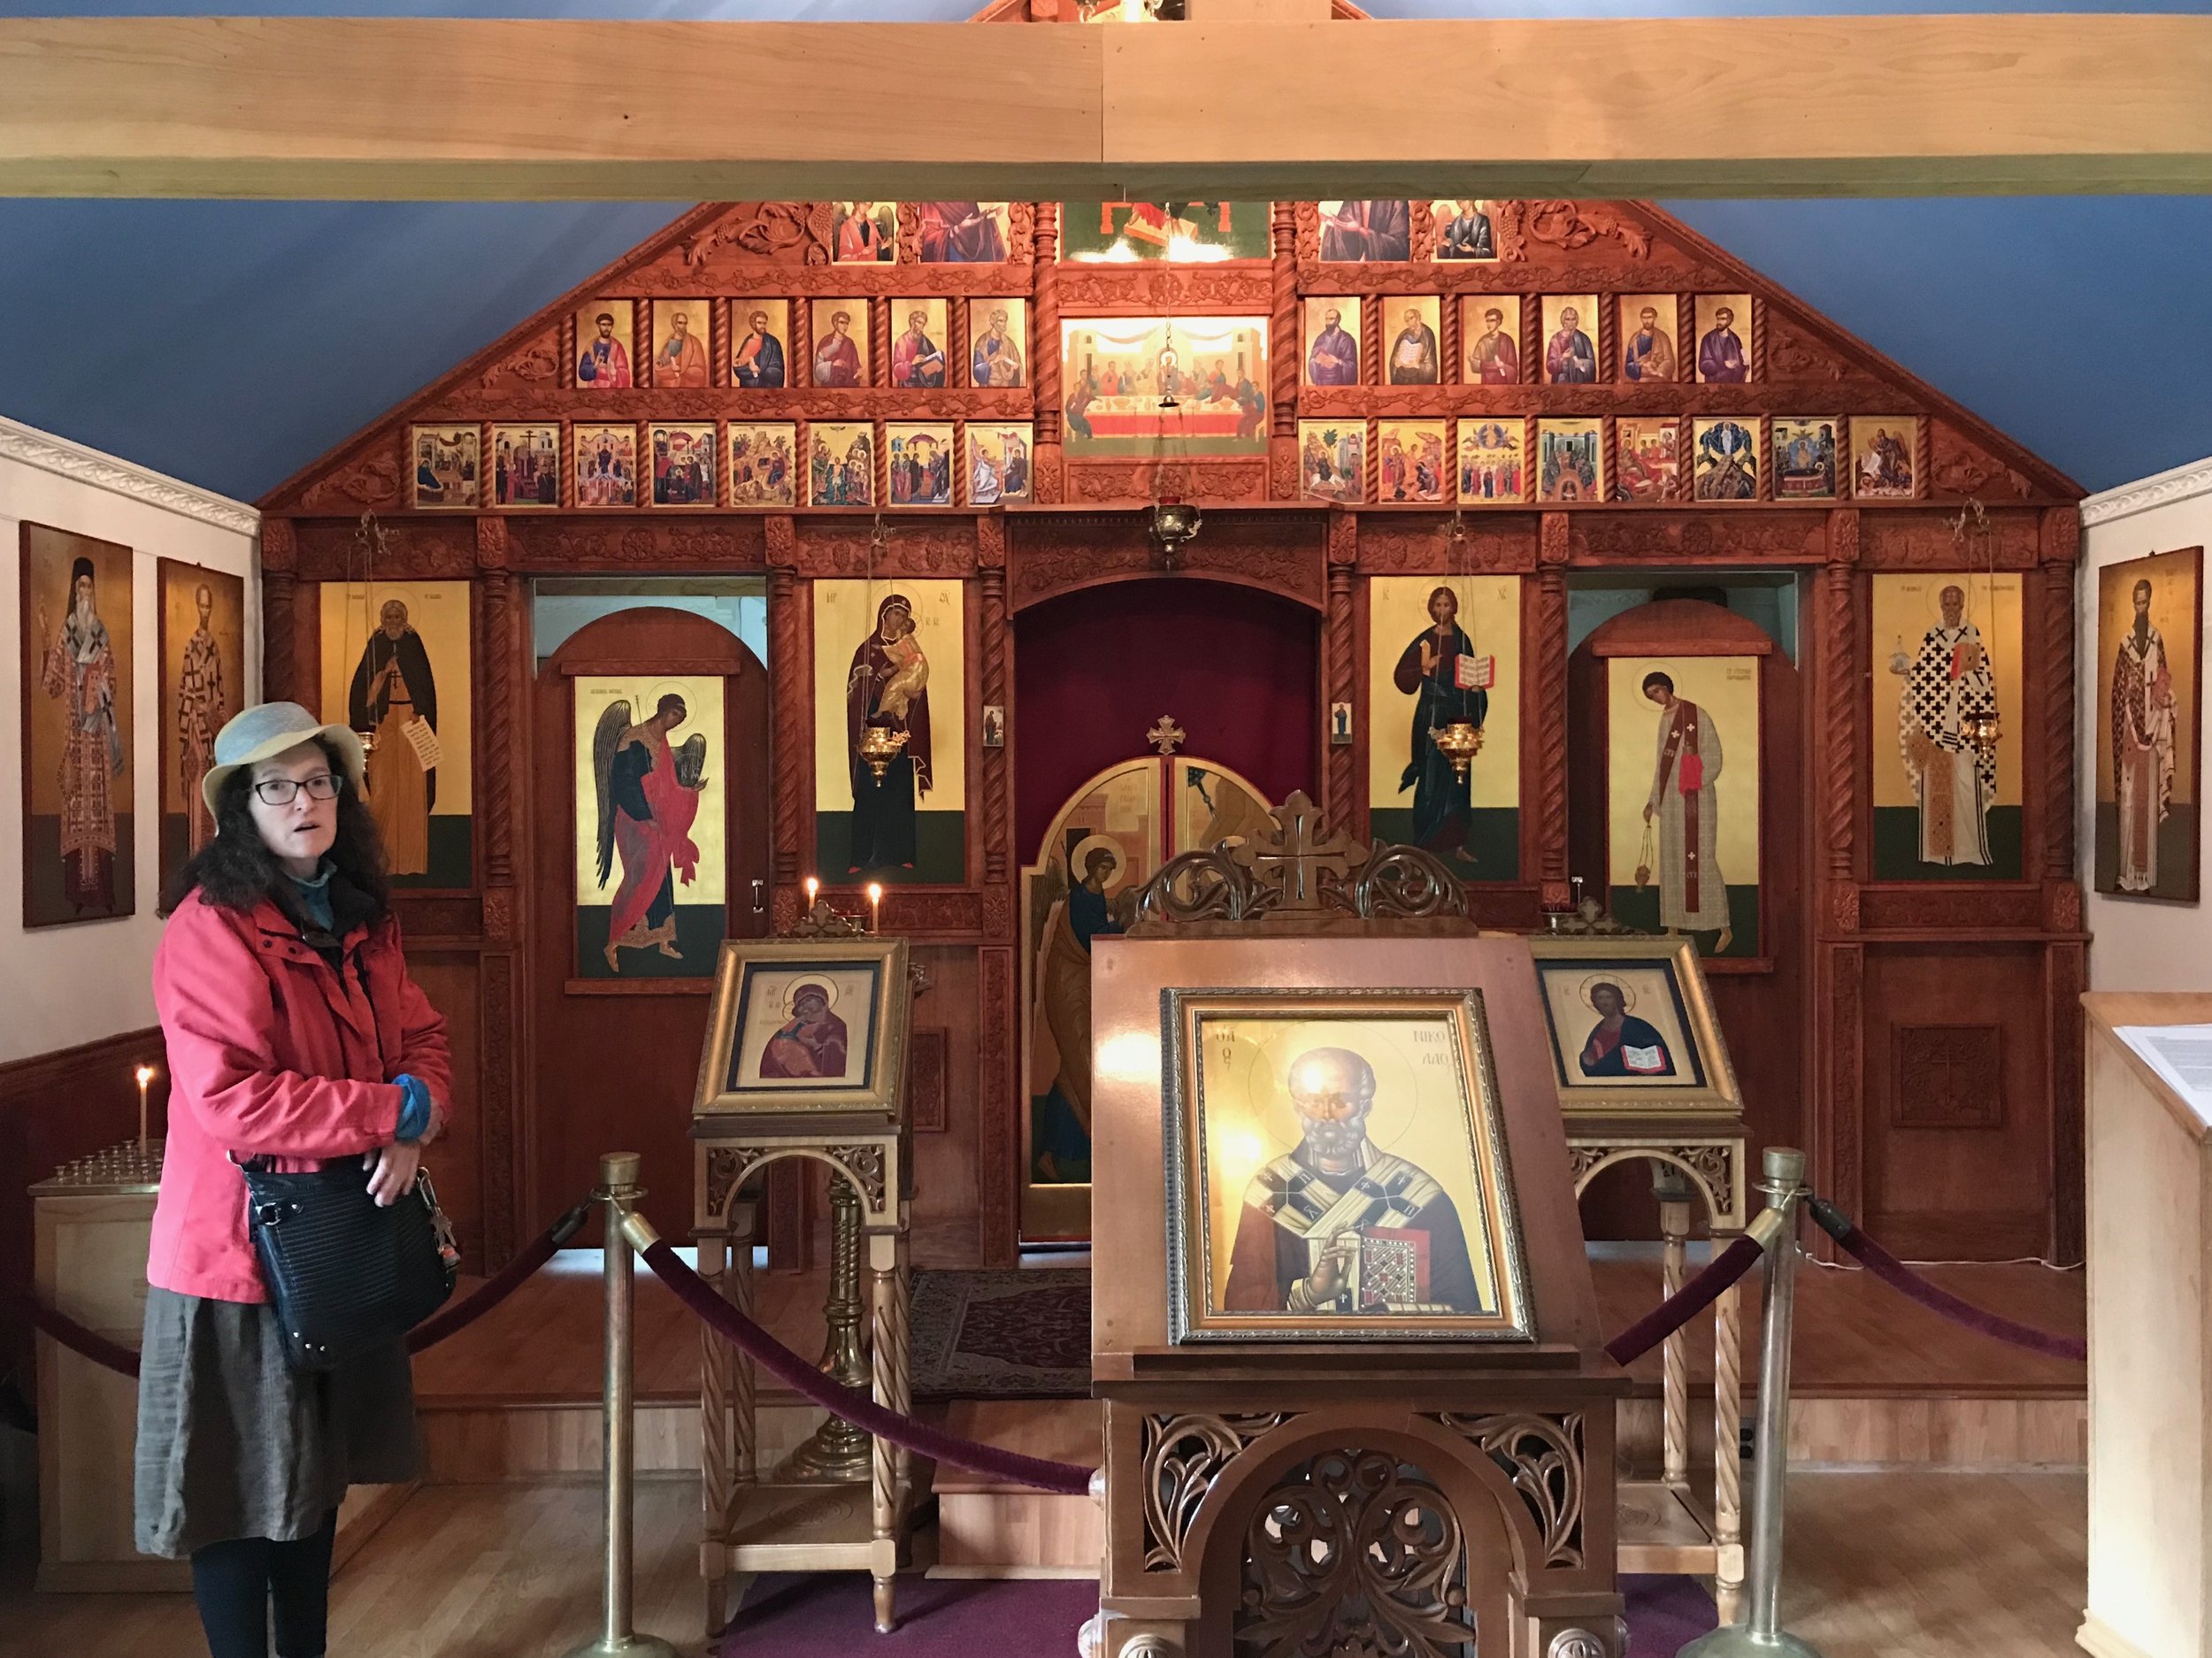  A guide describes the icons inside the Russian Orthodox Church in Elutna, Alaska.      